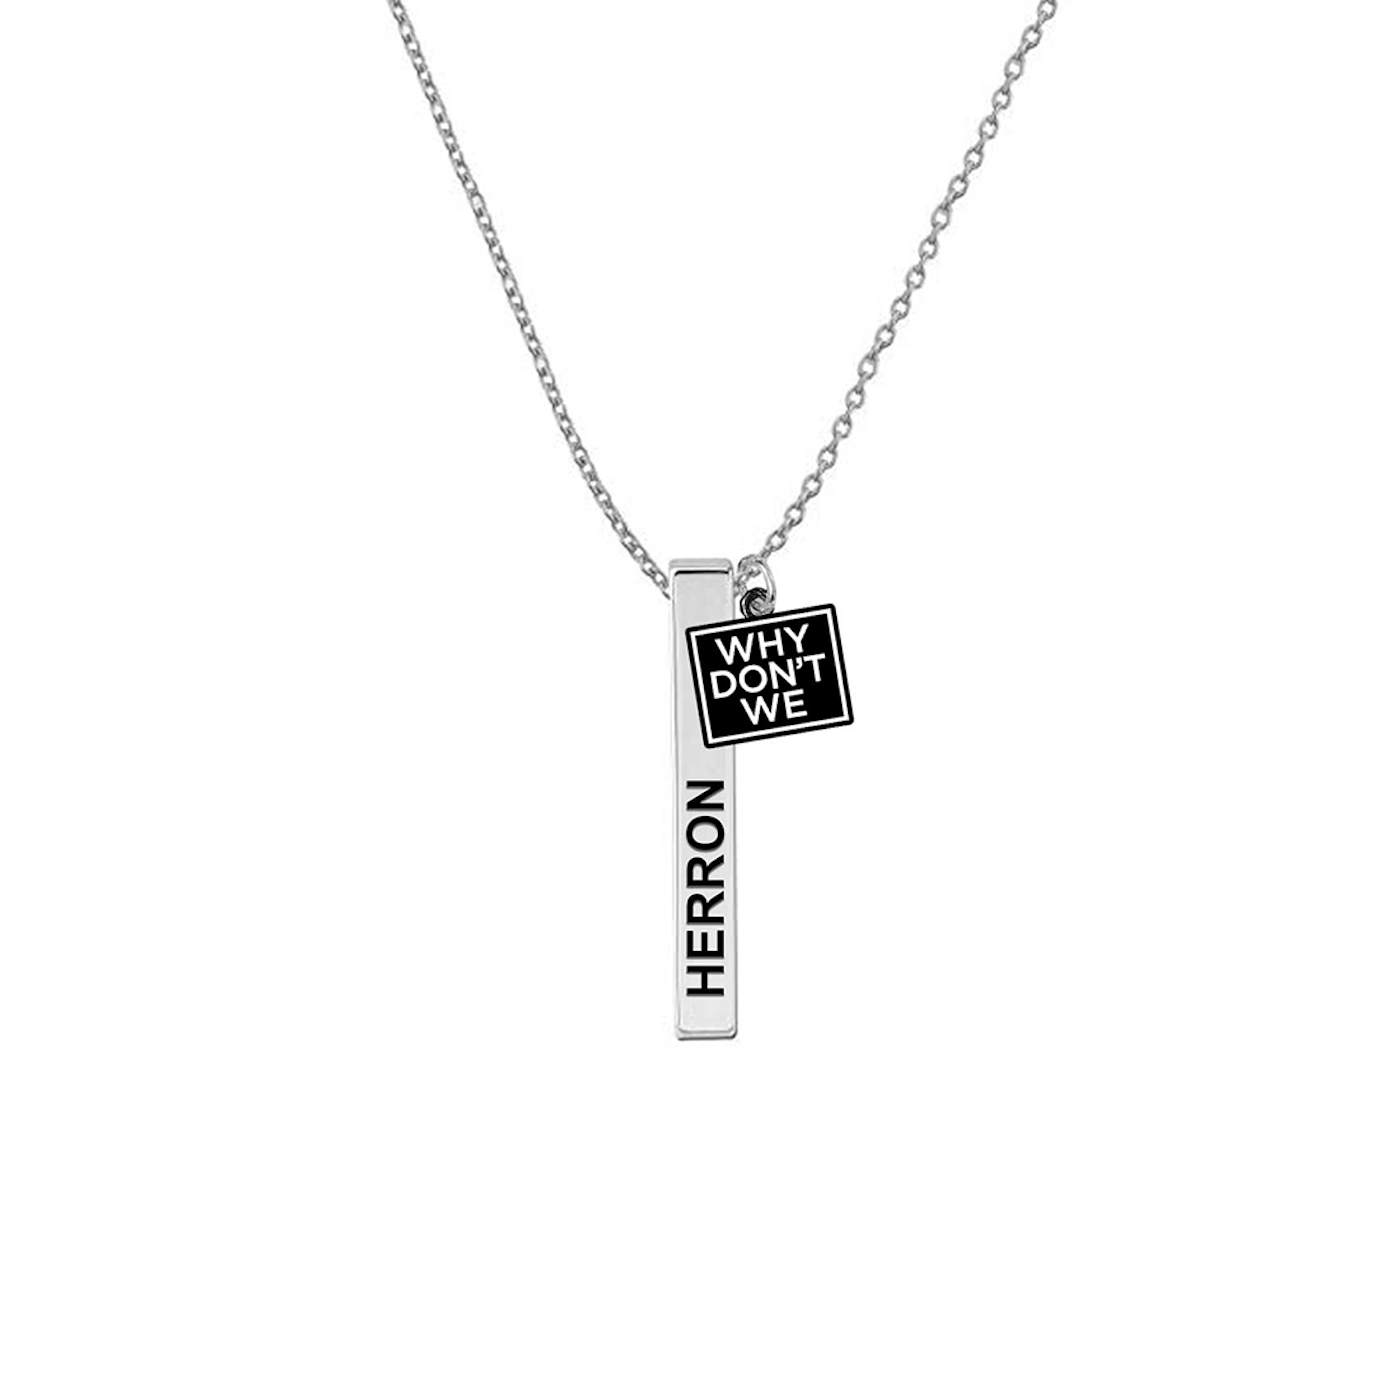 Why Don't We Herron Necklace